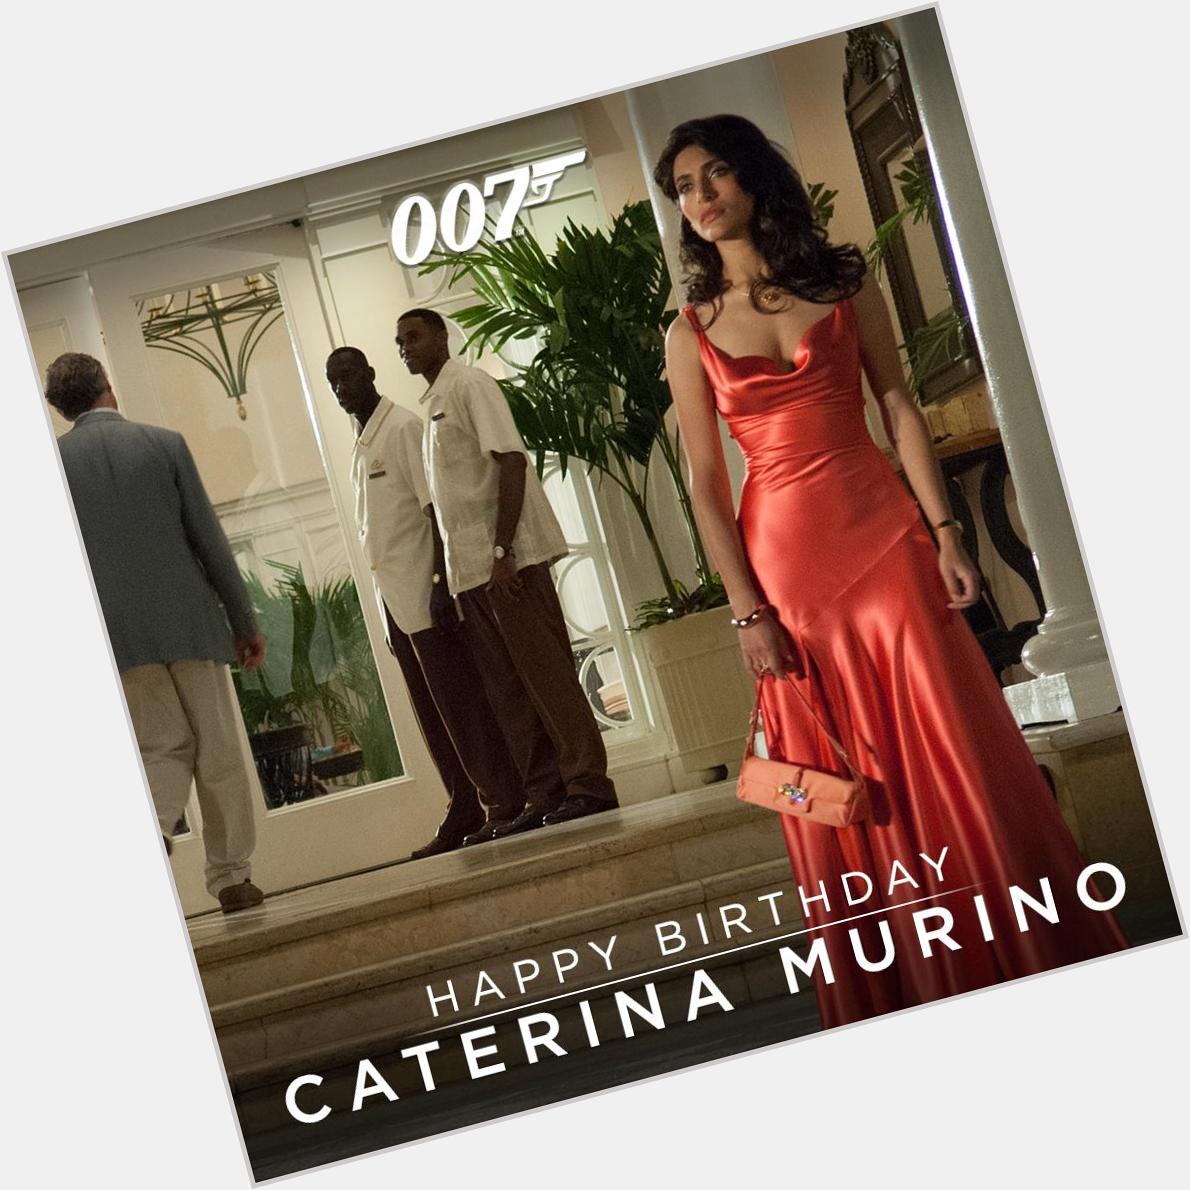 \" Happy birthday to Caterina Murino who played Solange in CASINO ROYALE (2006)  this woman is so beautiful...